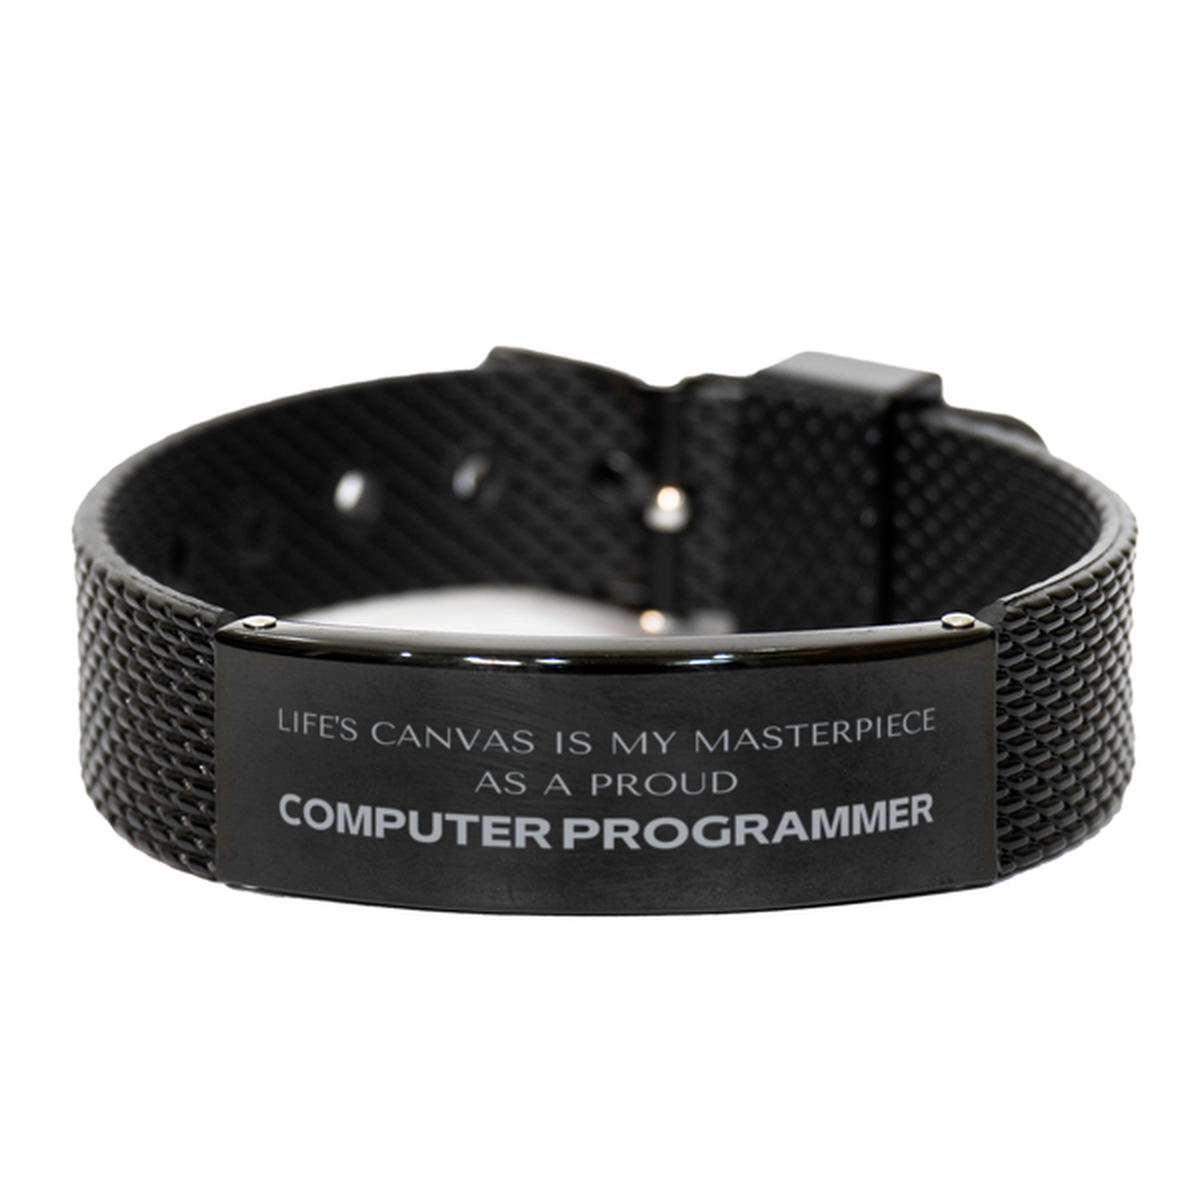 Proud Computer Programmer Gifts, Life's canvas is my masterpiece, Epic Birthday Christmas Unique Black Shark Mesh Bracelet For Computer Programmer, Coworkers, Men, Women, Friends